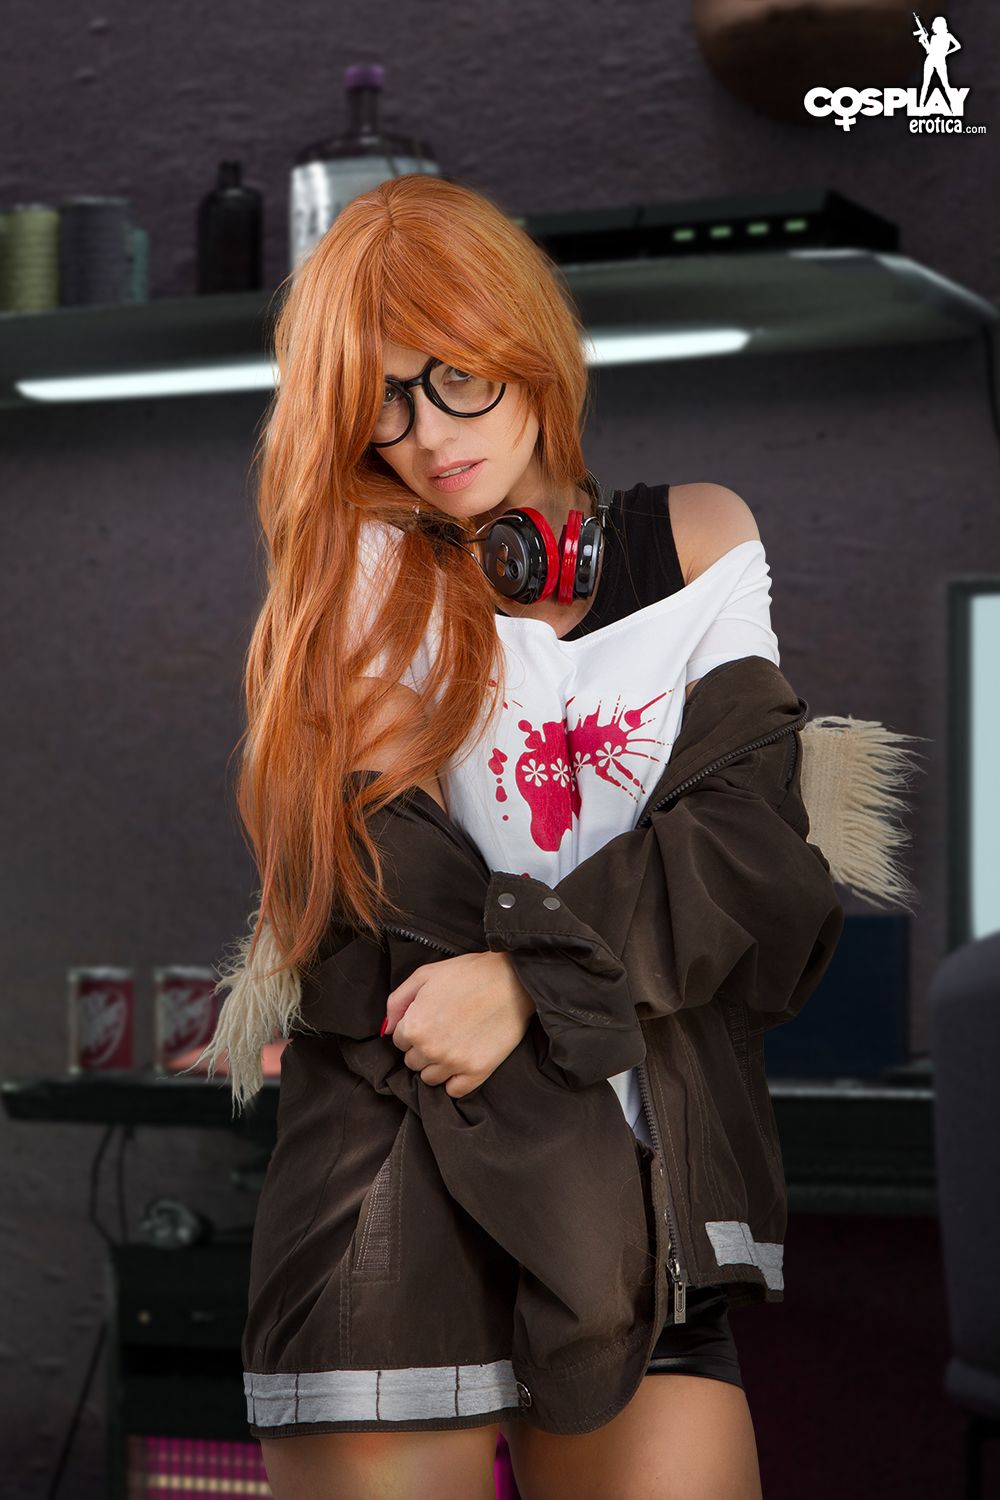 Cosplay Erotica’s Vickie Brown Is A Persona 5 Phantom Thief